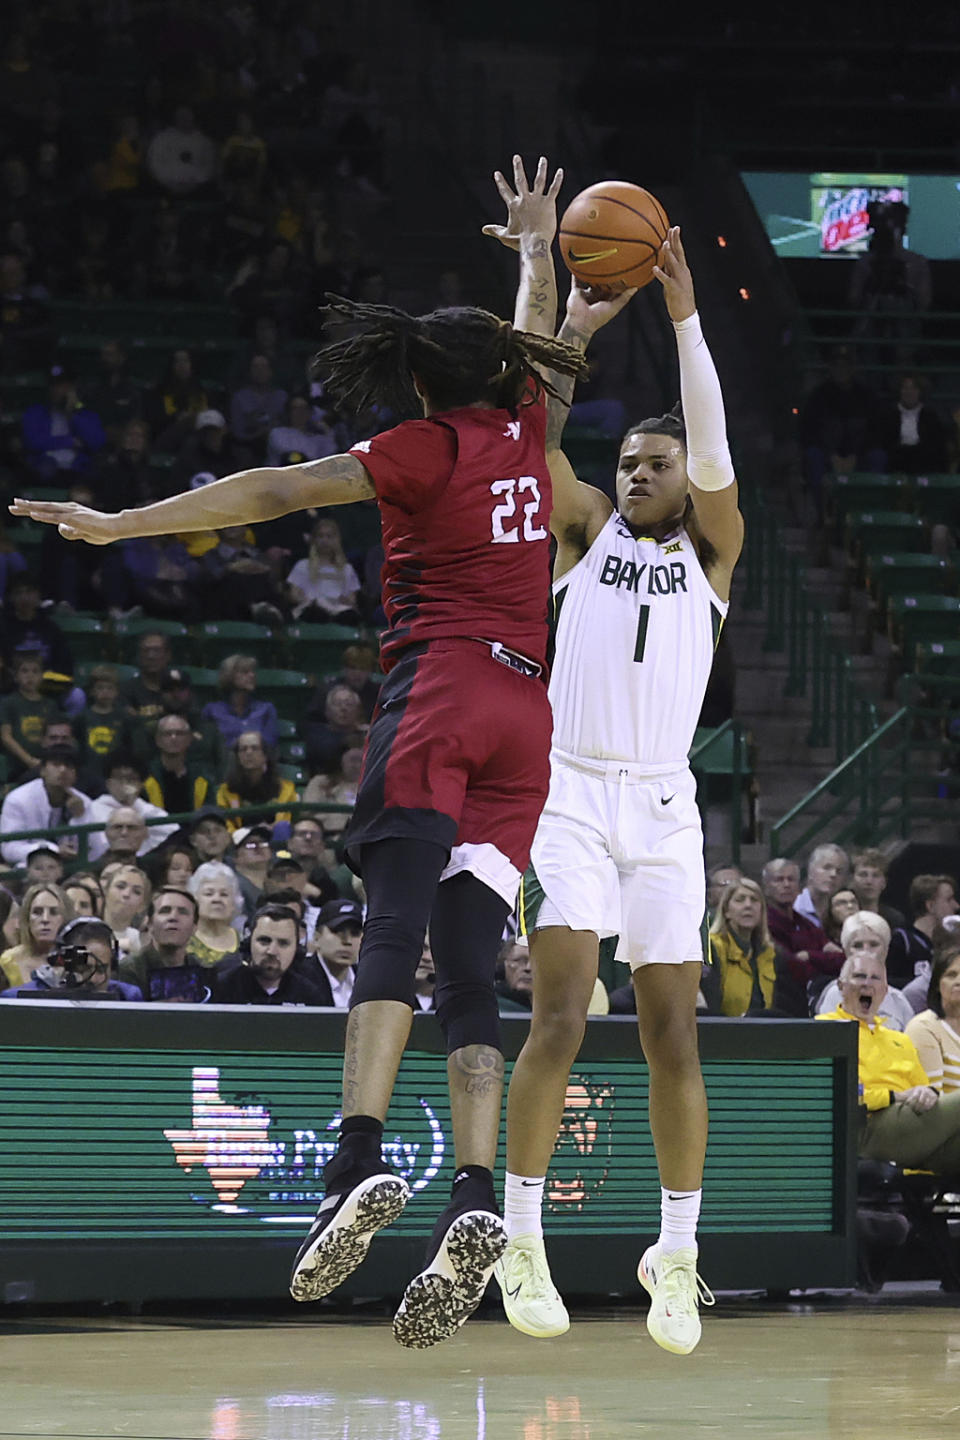 Baylor guard Keyonte George (1) shoots a 3-pointer past Nicholls State forward Manny Littles (22) during the first half of an NCAA college basketball game Wednesday, Dec. 28, 2022, in Waco, Texas. (AP Photo/Jerry Larson)